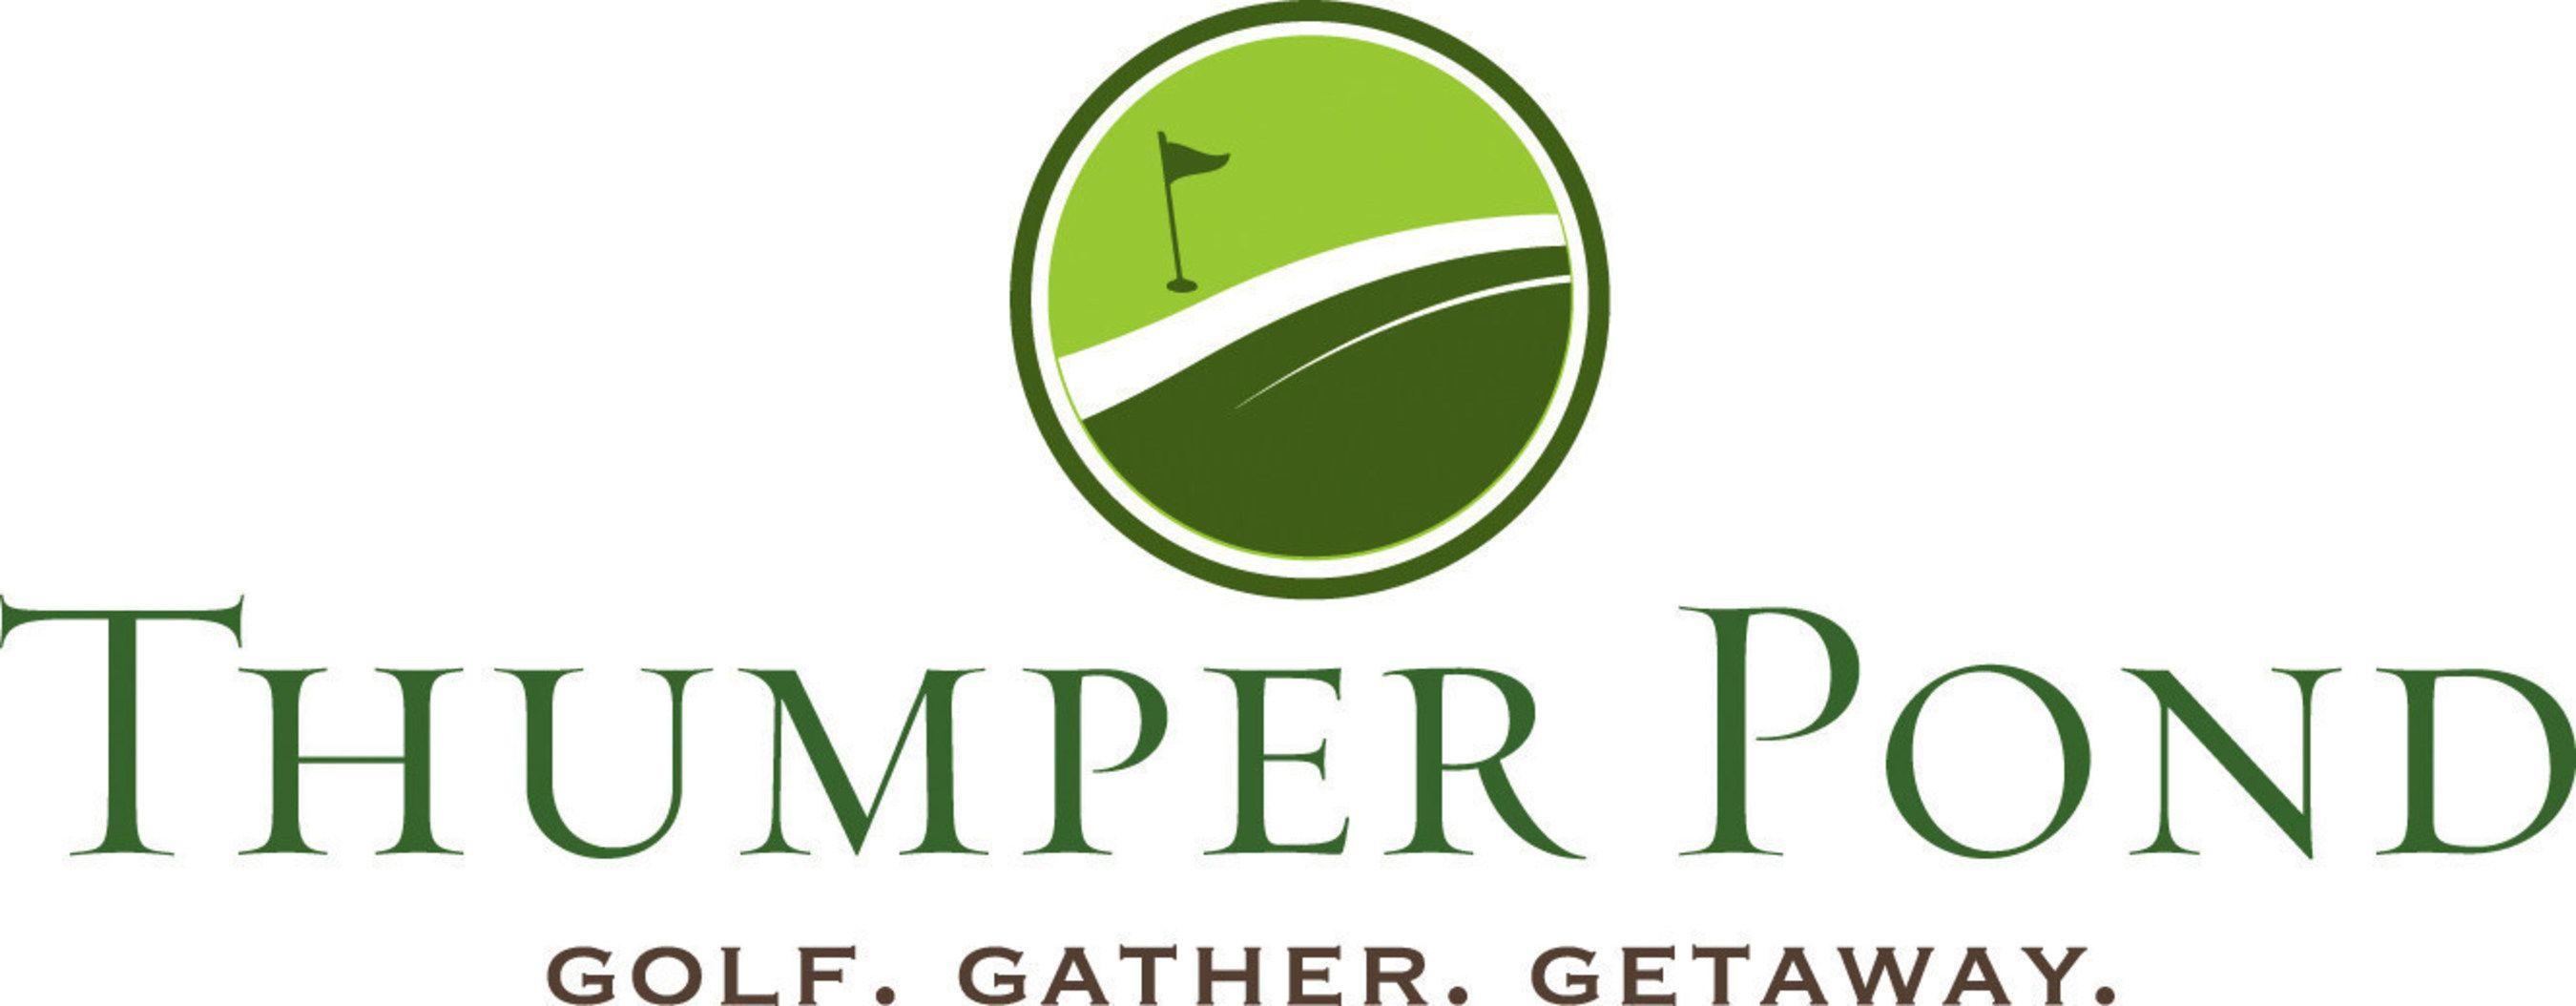 Thumper Logo - Thumper Pond Resort Water Park Reopens After Roof Collapsed 18 ...